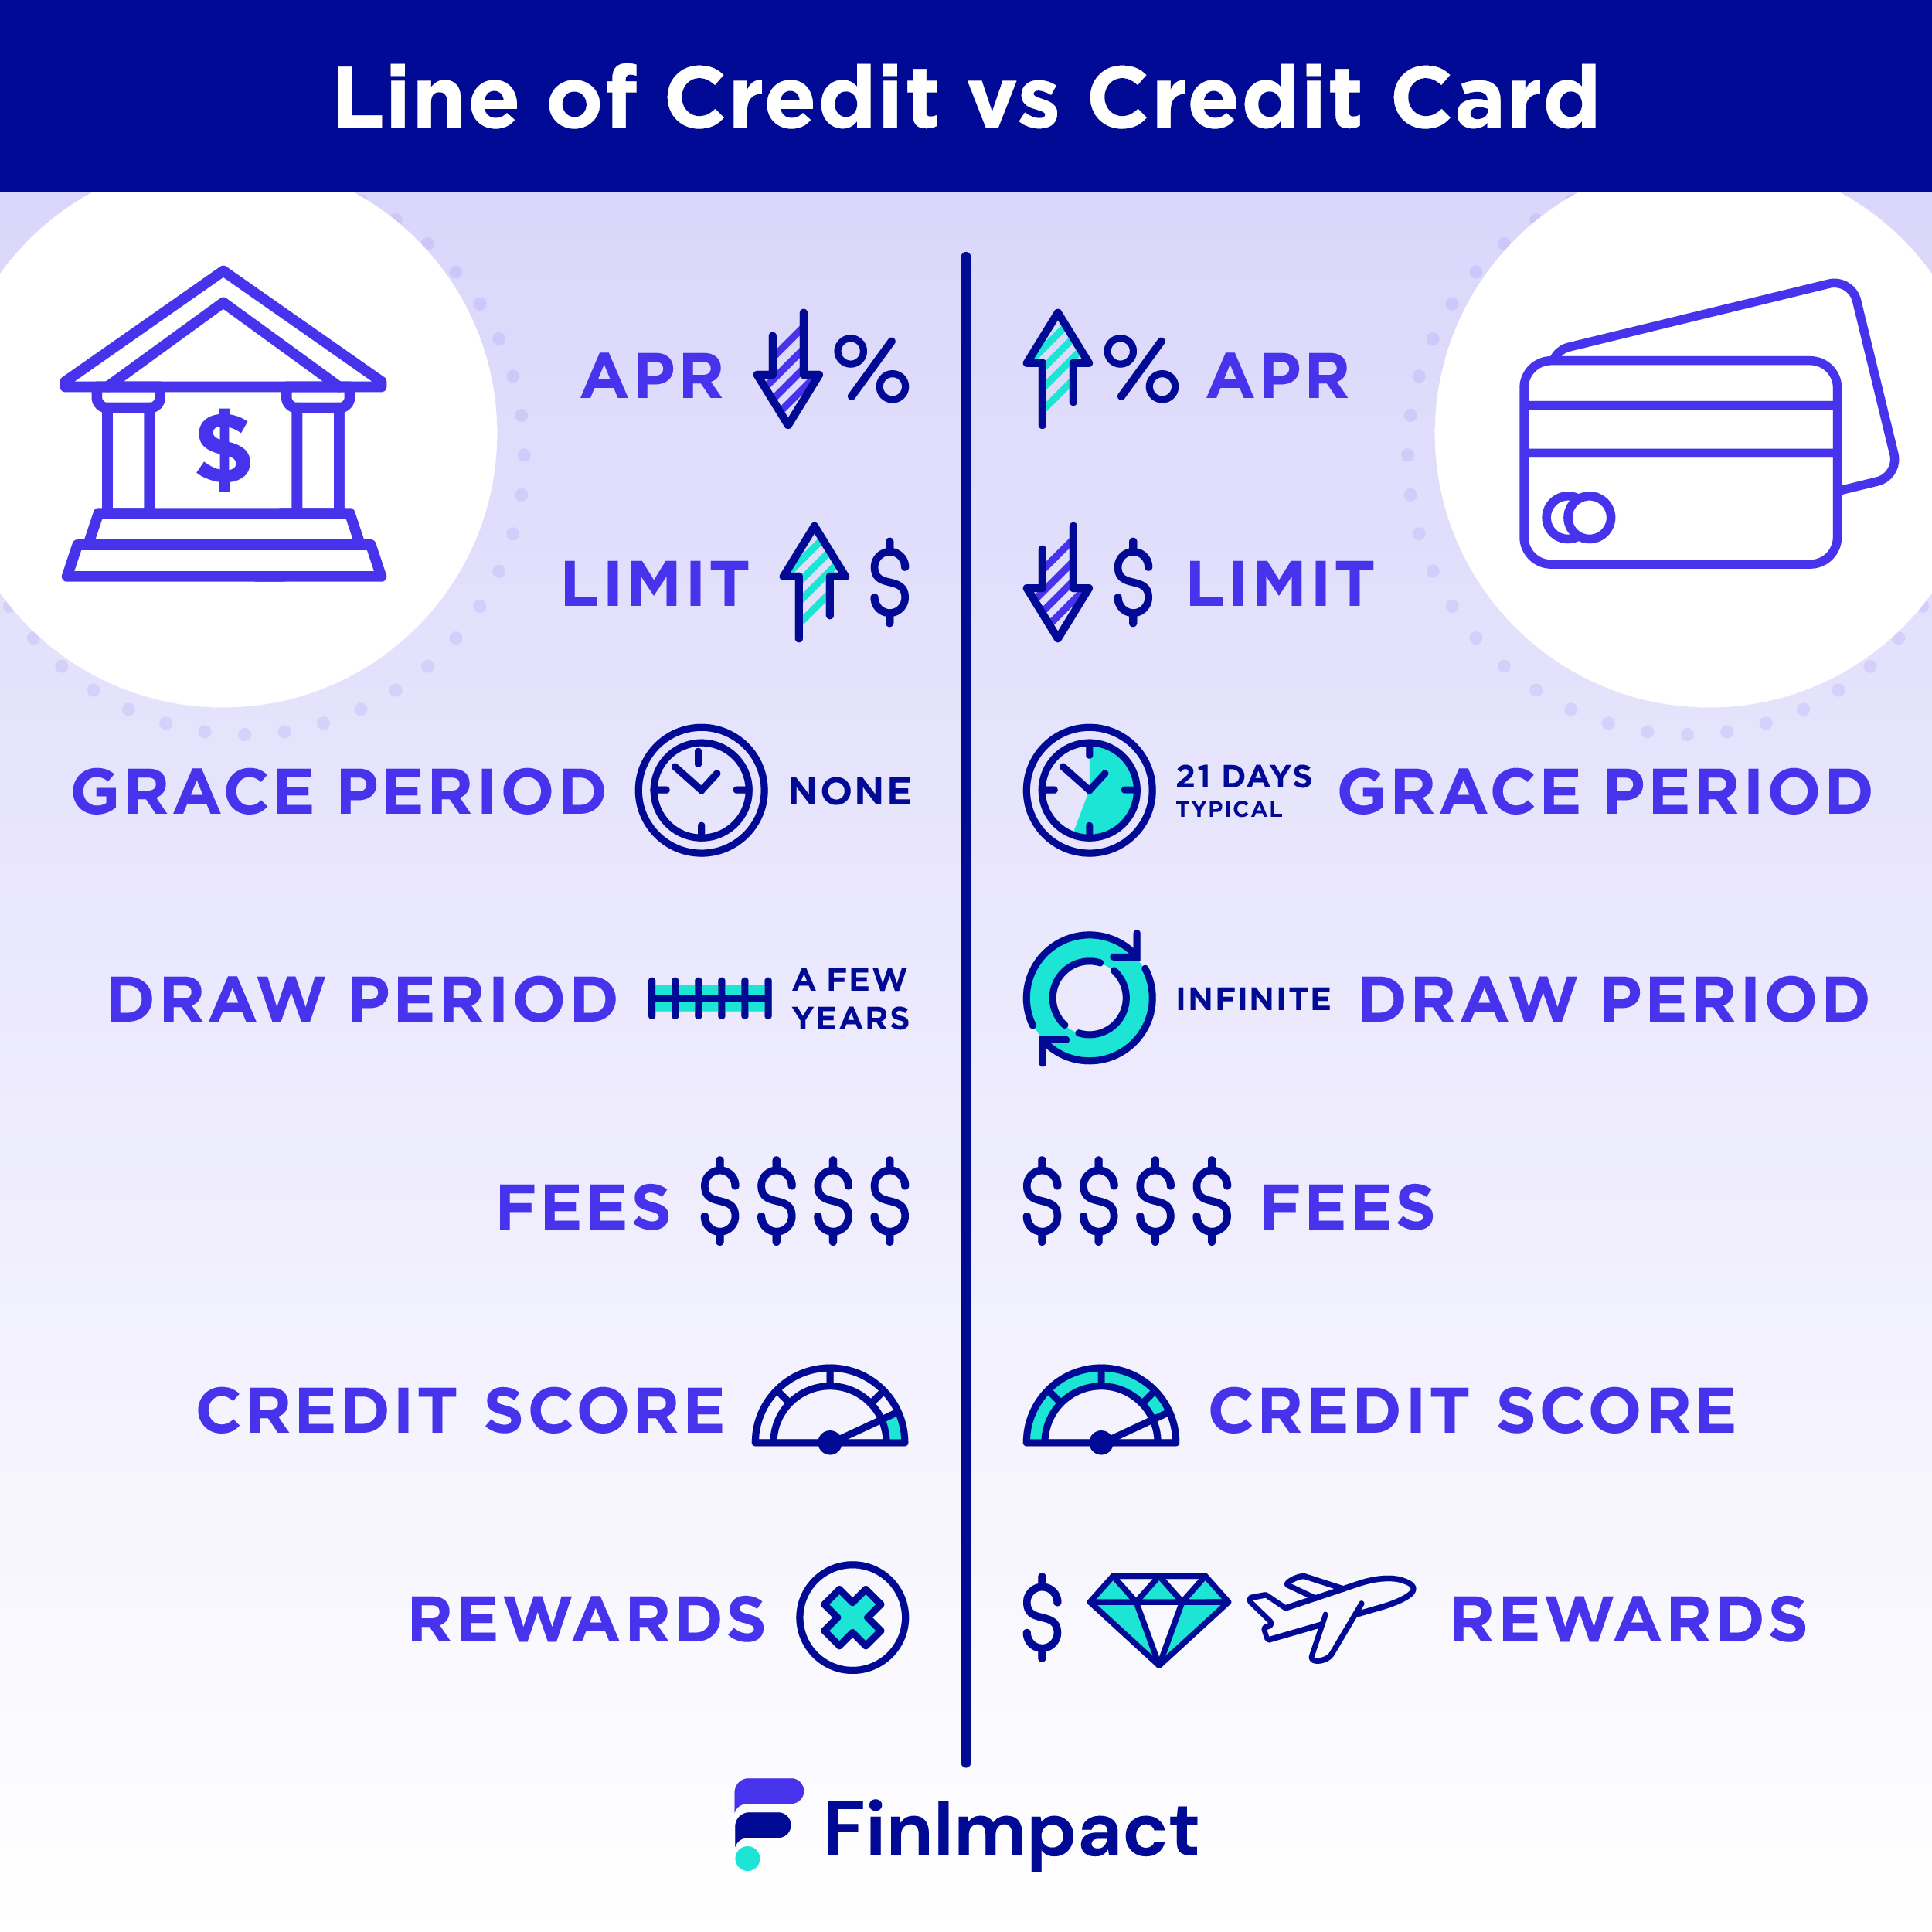 Line of Credit vs Credit Card: Which One Is Cheaper?